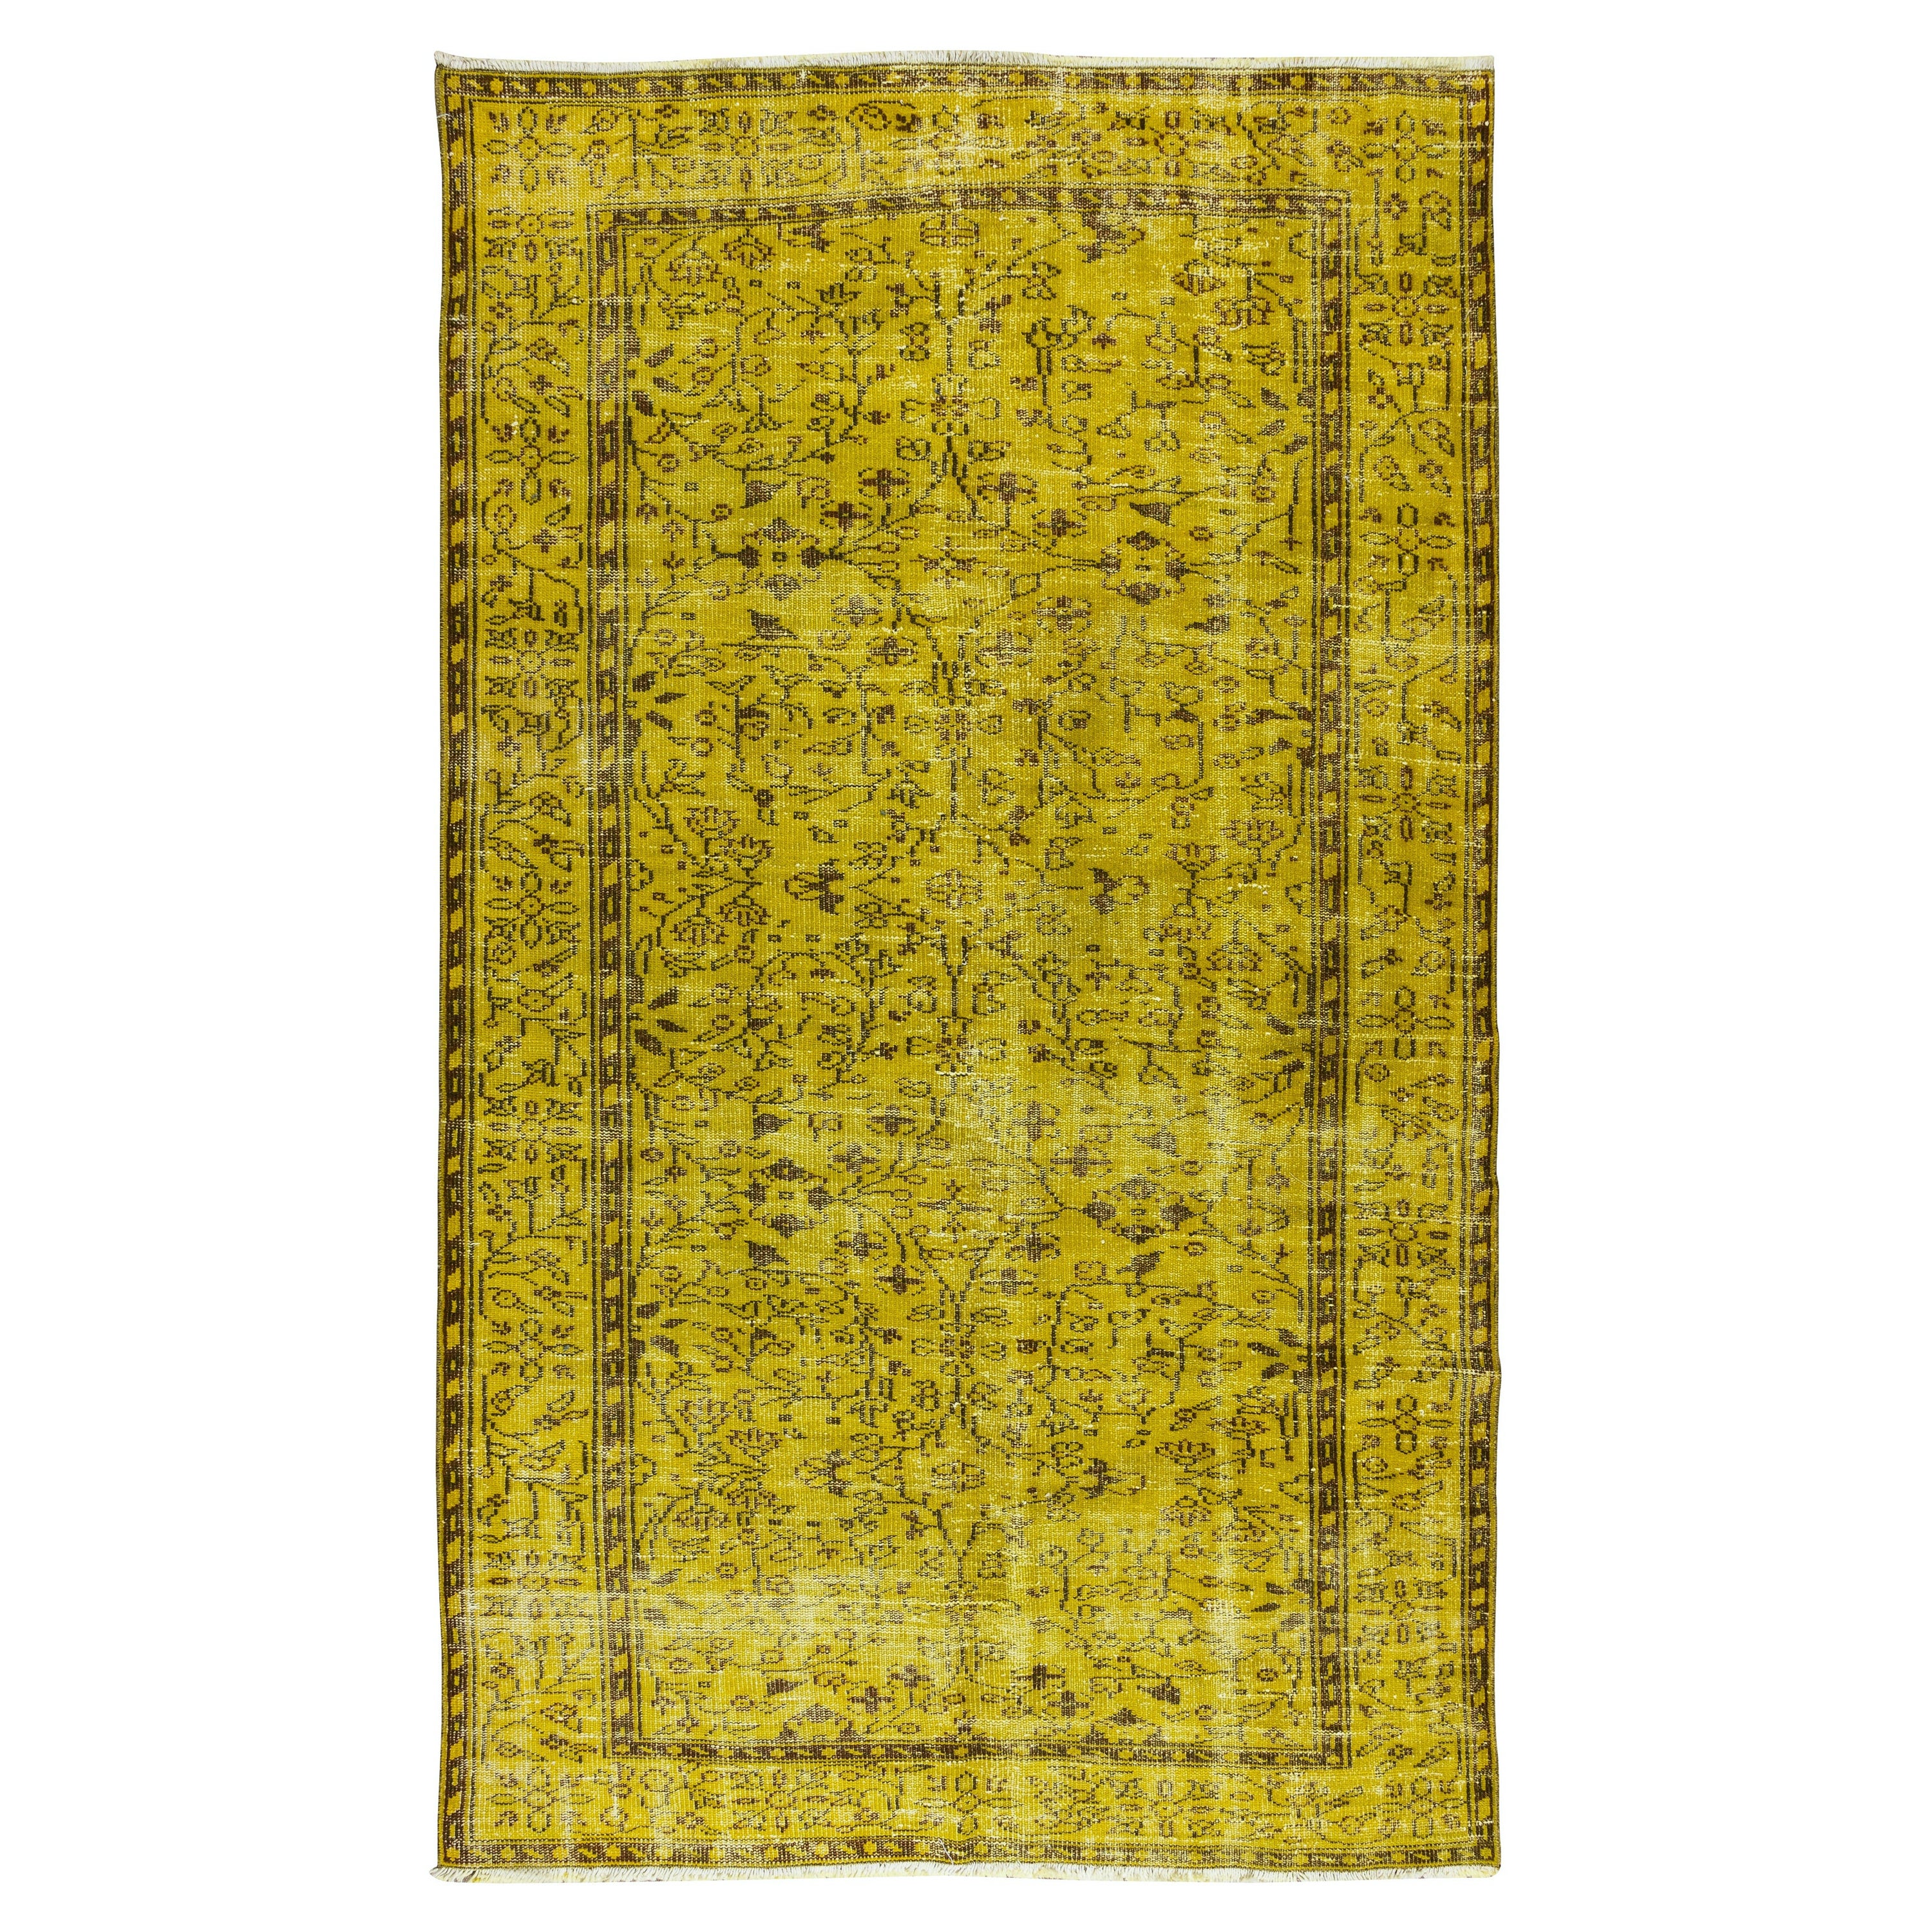 5.3x8.6 Ft Handmade Turkish Yellow Area Rug with Floral Design For Sale